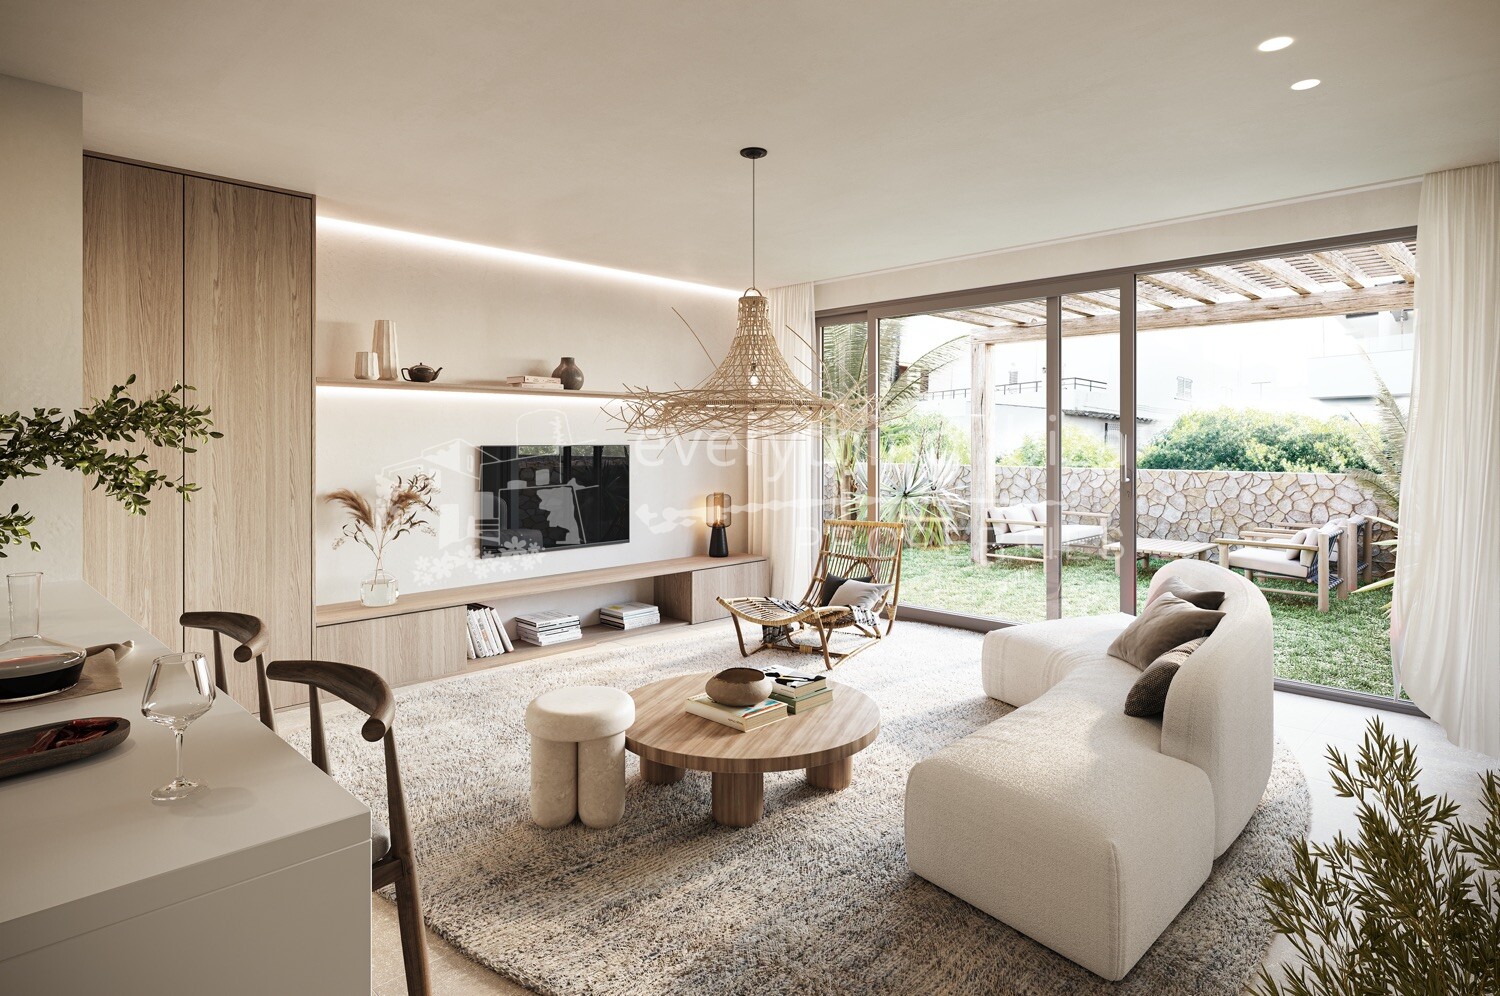 Modern Luxury New Build Apartments in Jesus, ref. 1405, for sale in Ibiza by everything ibiza Properties